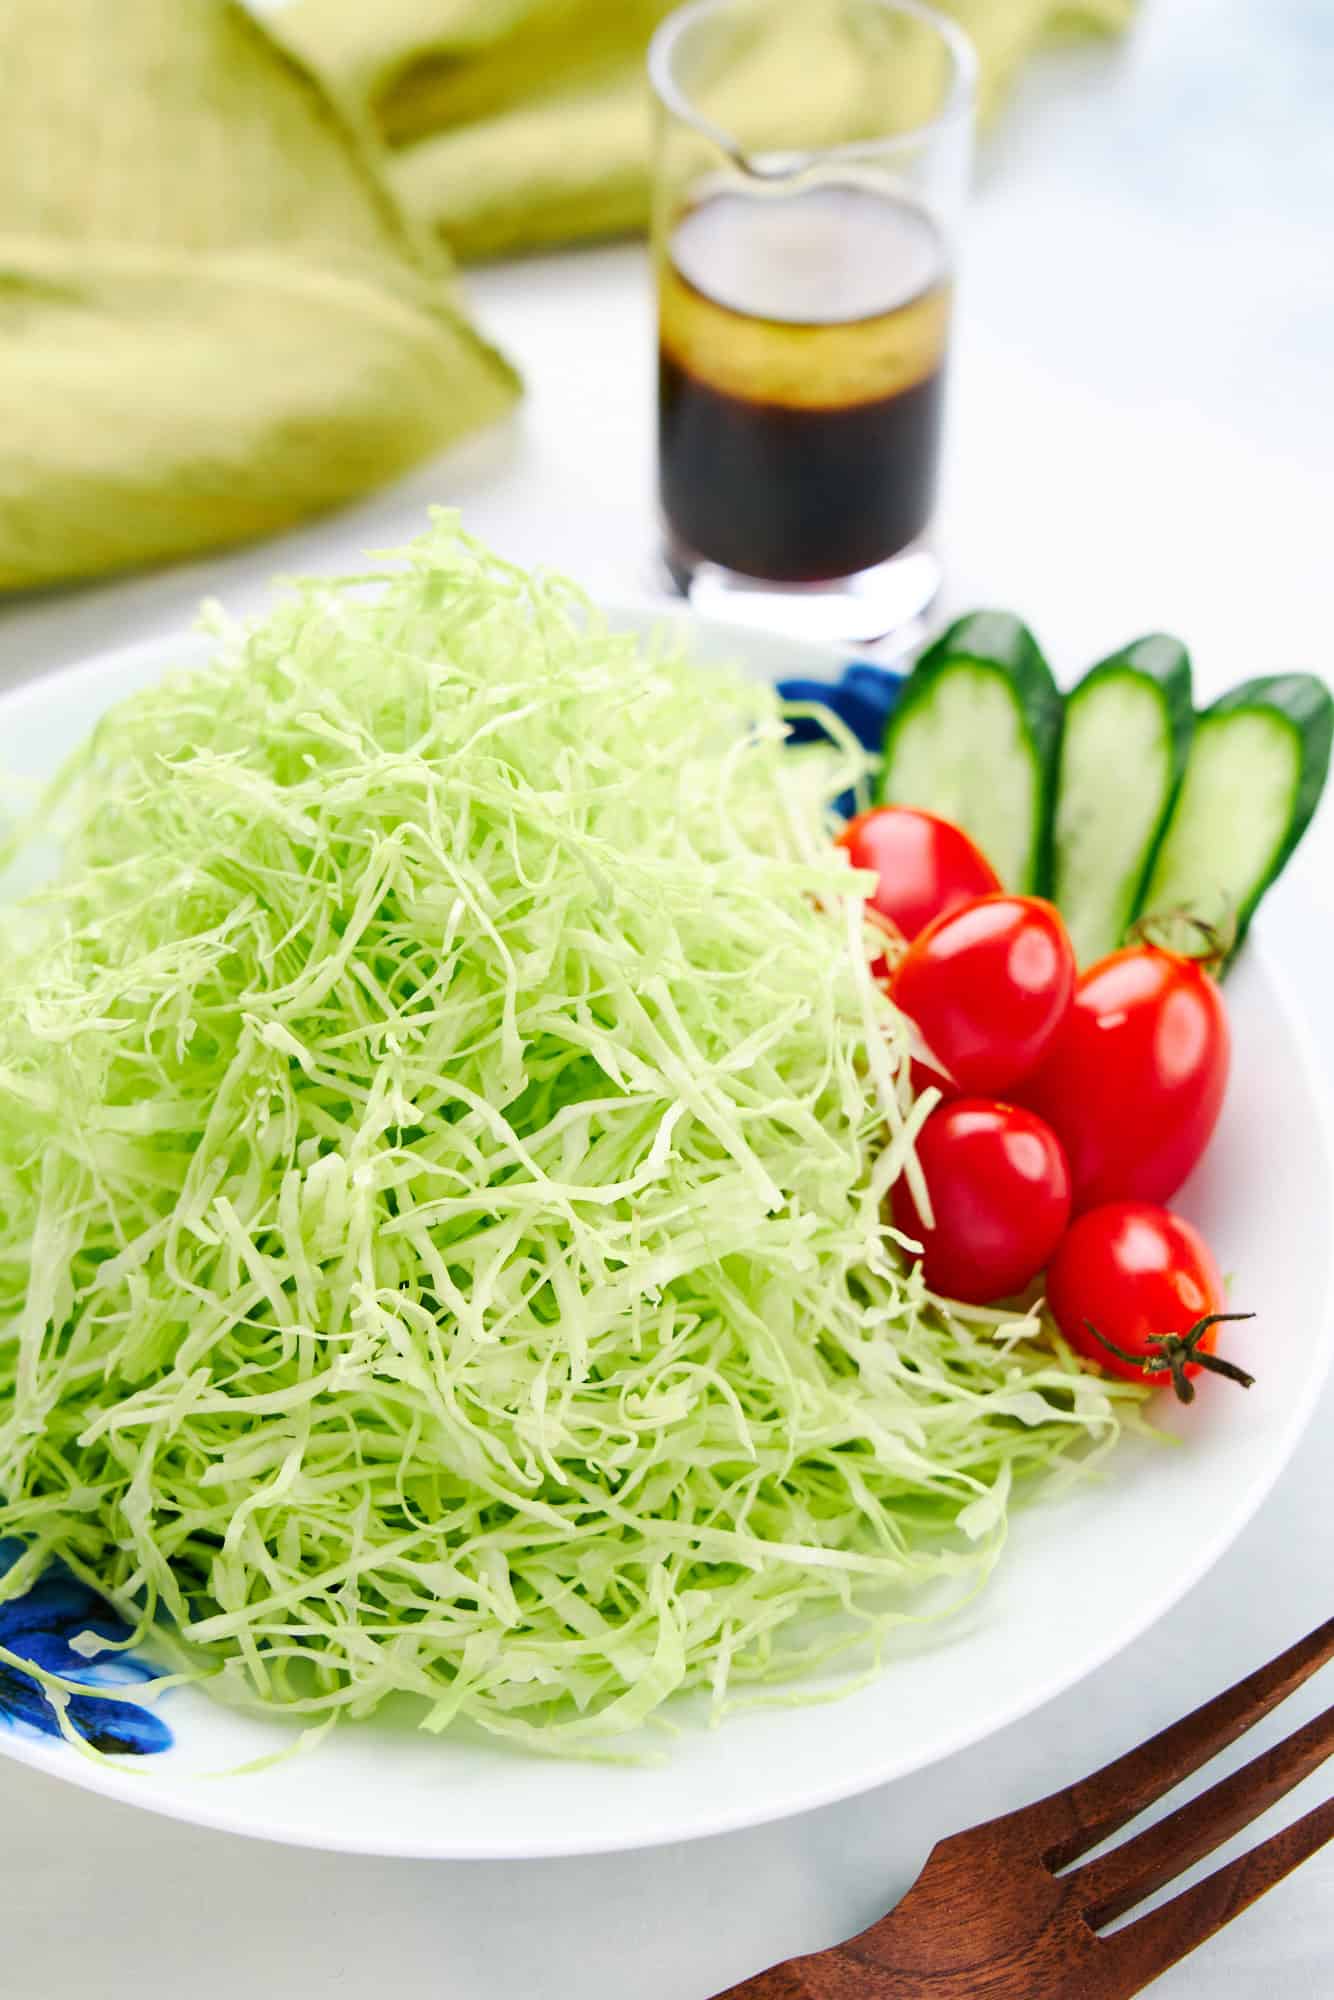 Japanese shredded cabbage salad is served as a side dish for many Japanese fried dishes such as tonkatsu, ebifry, and korokke.